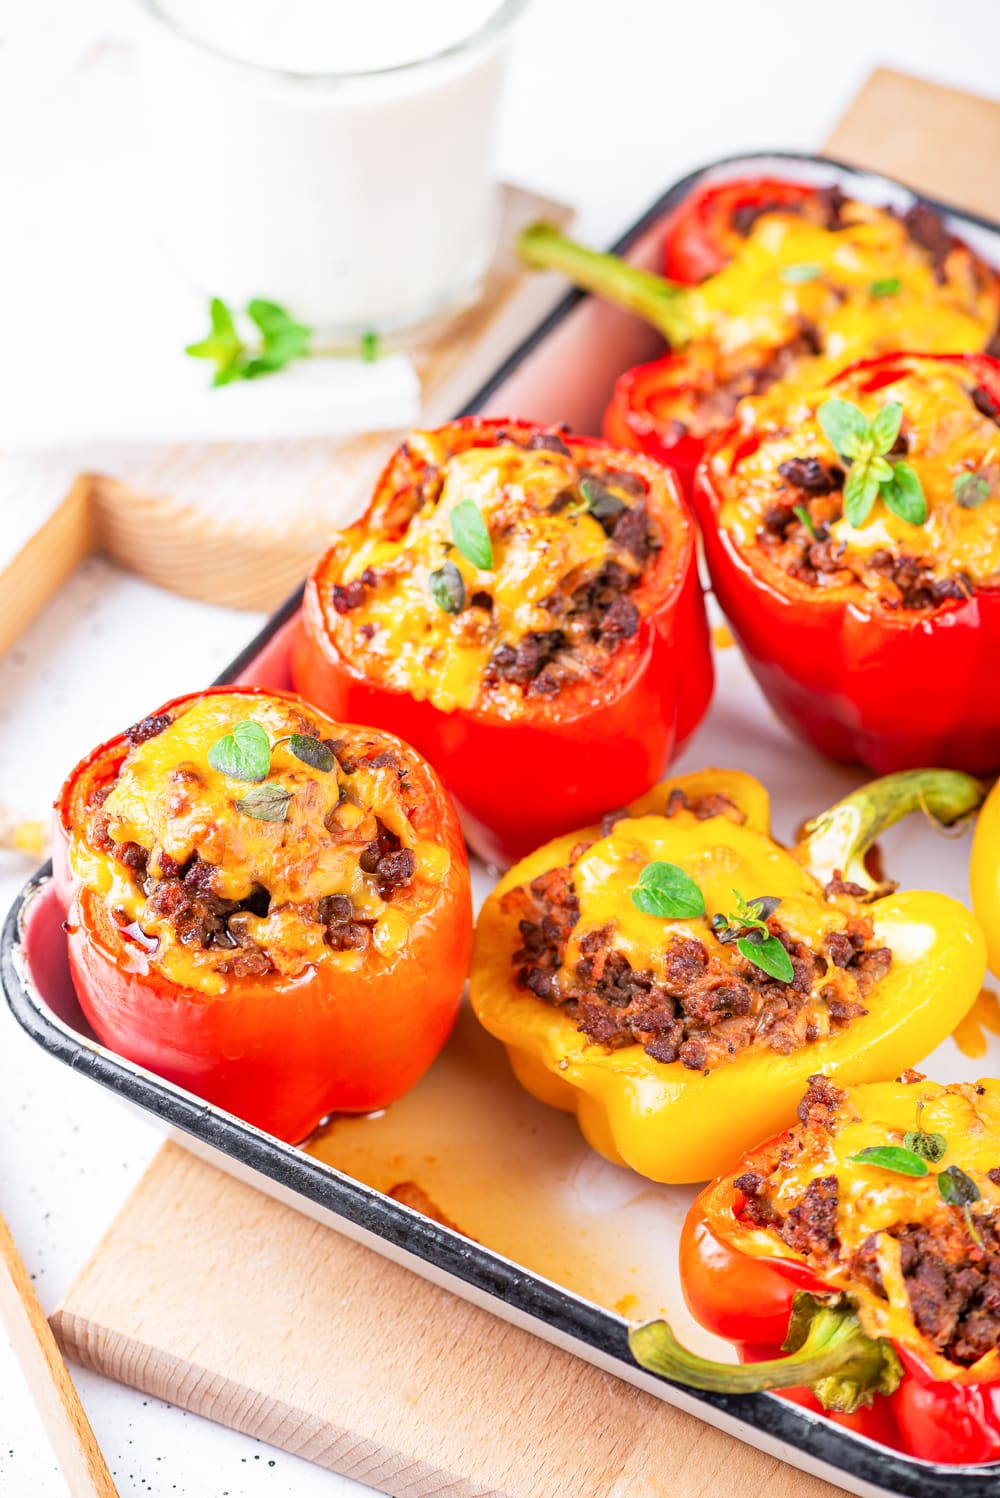 A mixture of whole stuffed bell peppers, and ones that have been cut in half and stuffed.